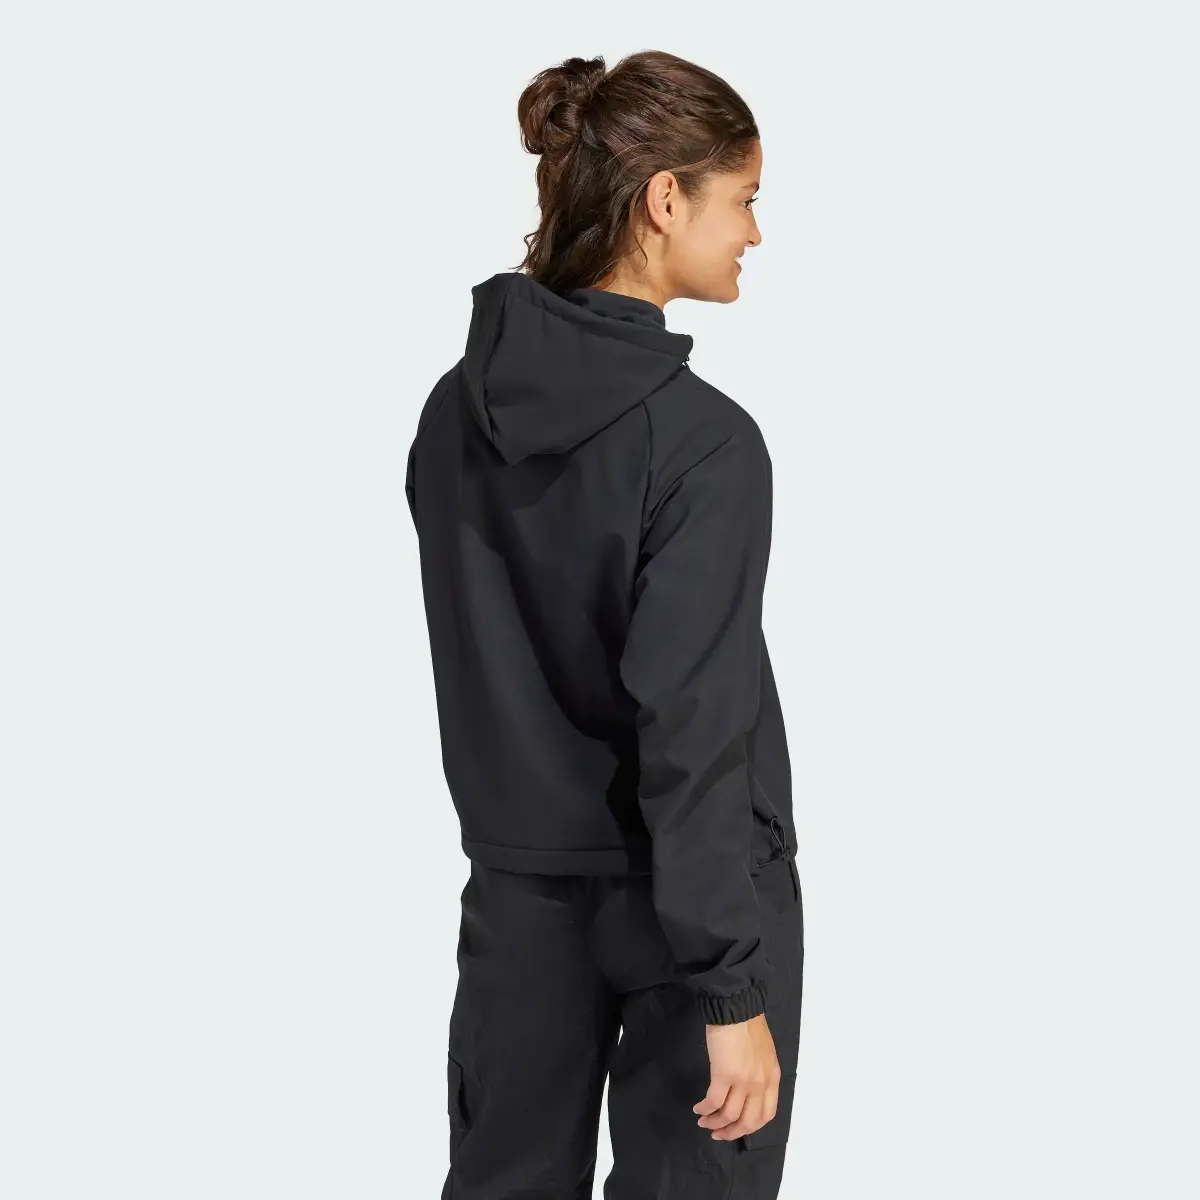 Adidas City Escape Hoodie With Bungee Cord. 3